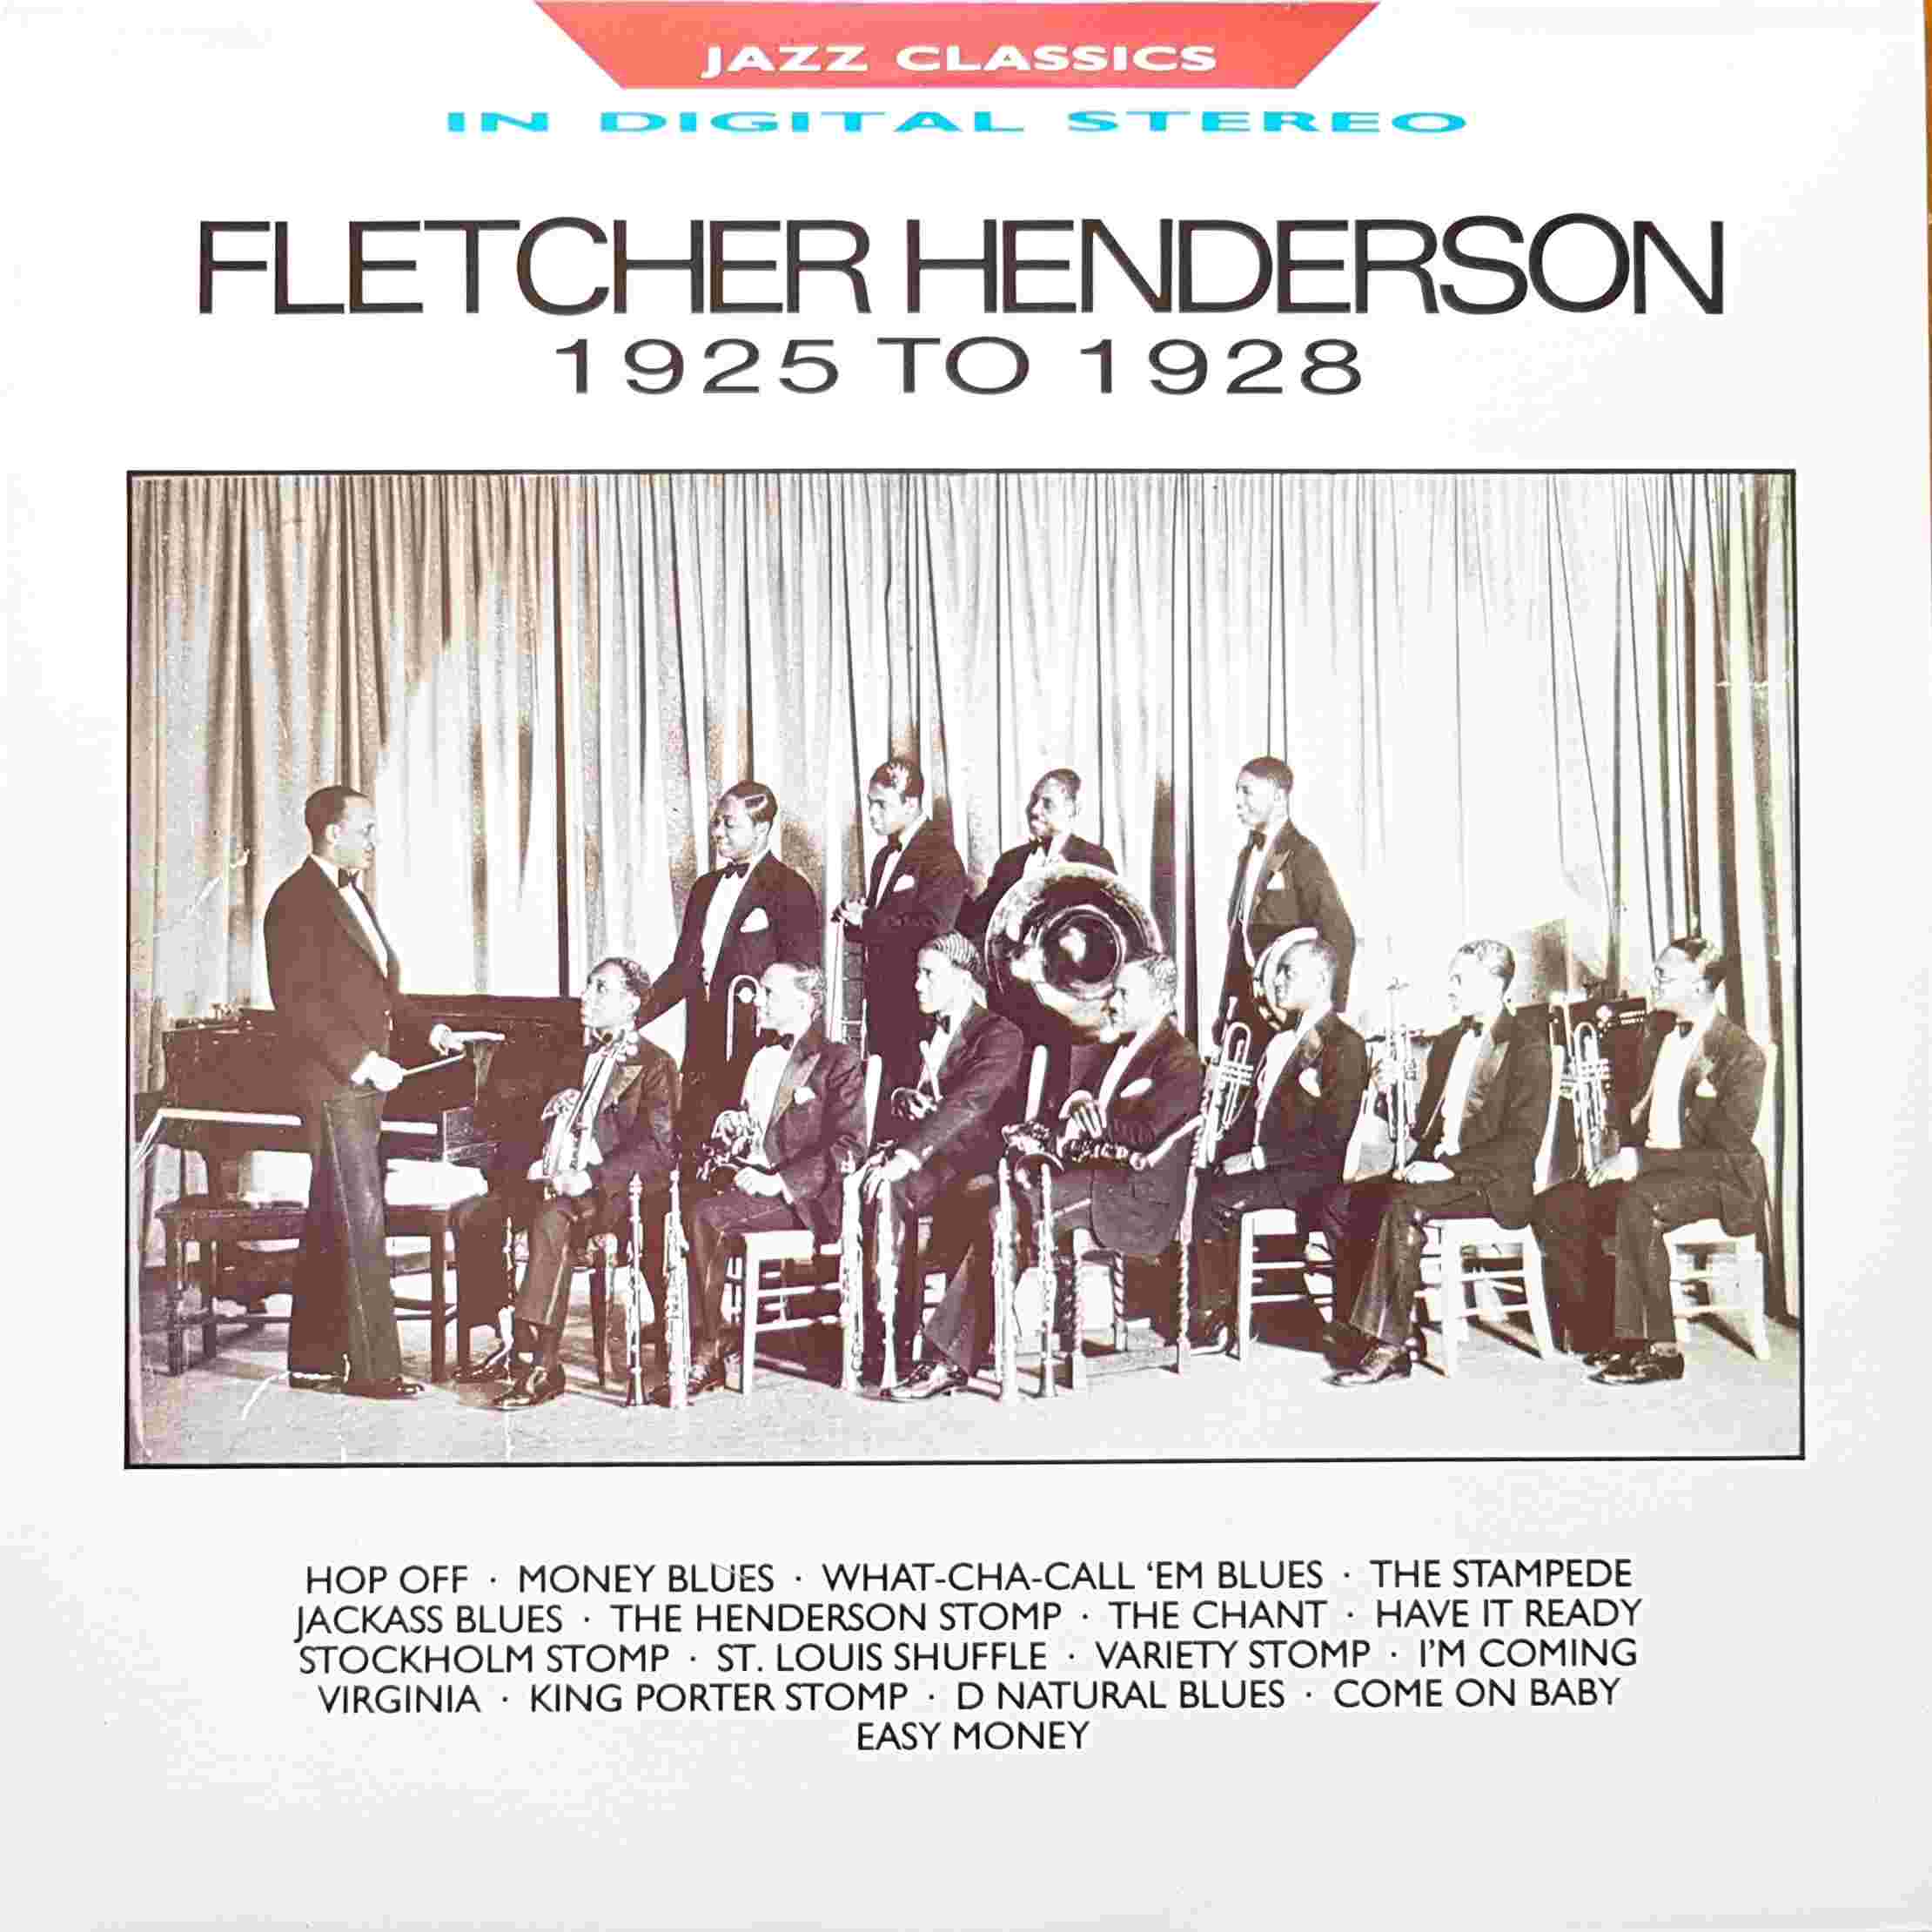 Picture of REB 720 Jazz classics - Fletcher Henderson 1925 - 1928 by artist Fletcher Henderson  from the BBC albums - Records and Tapes library